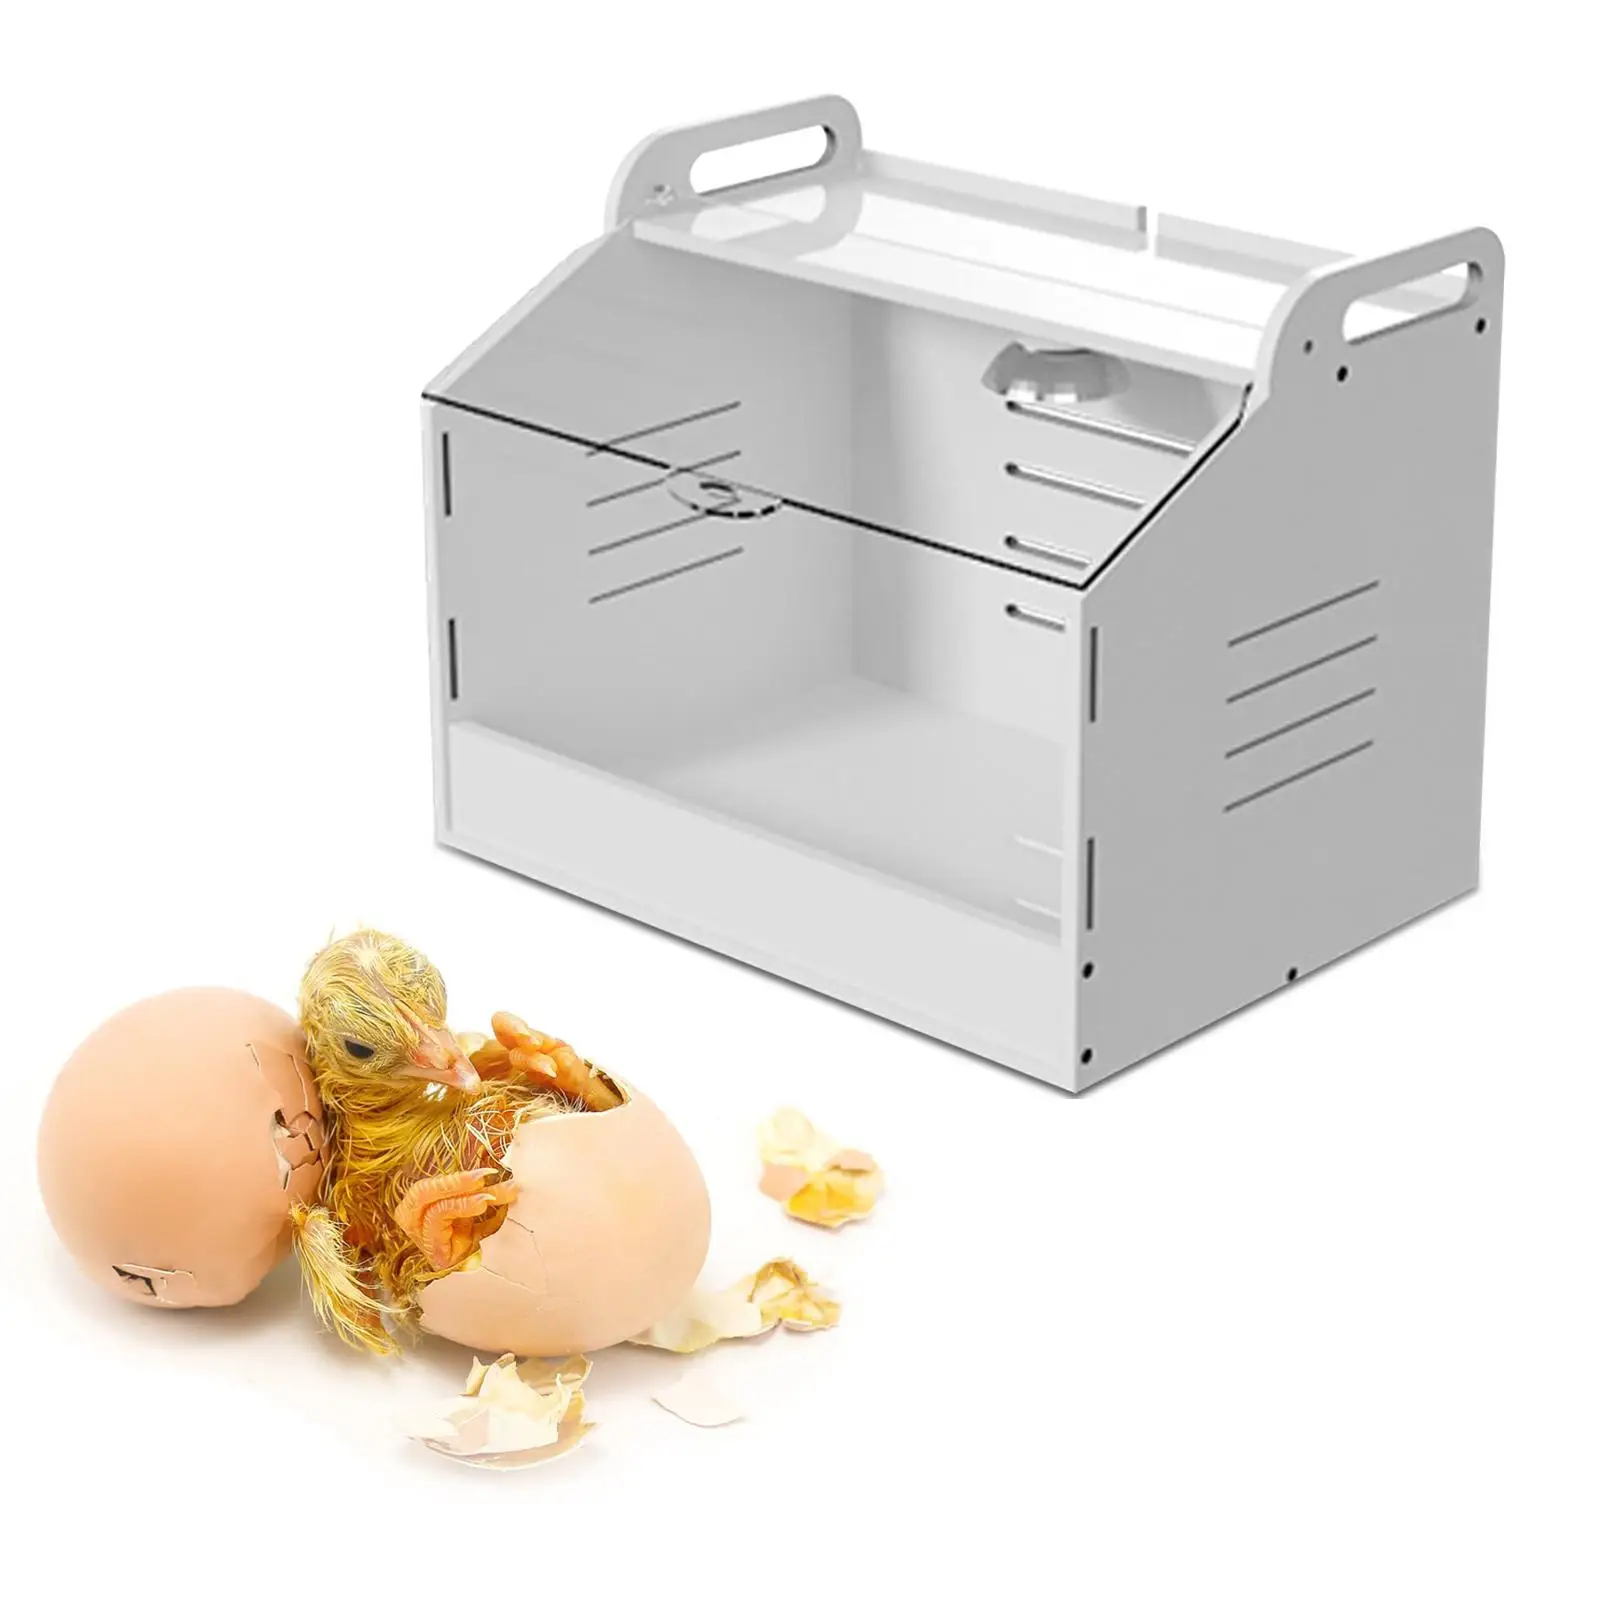 Automatic Poultry Hatcher Machine Hatching Poultry Incubation Box Egg Incubator Farm Equipment for Parakeet Turkey Quail Chicken